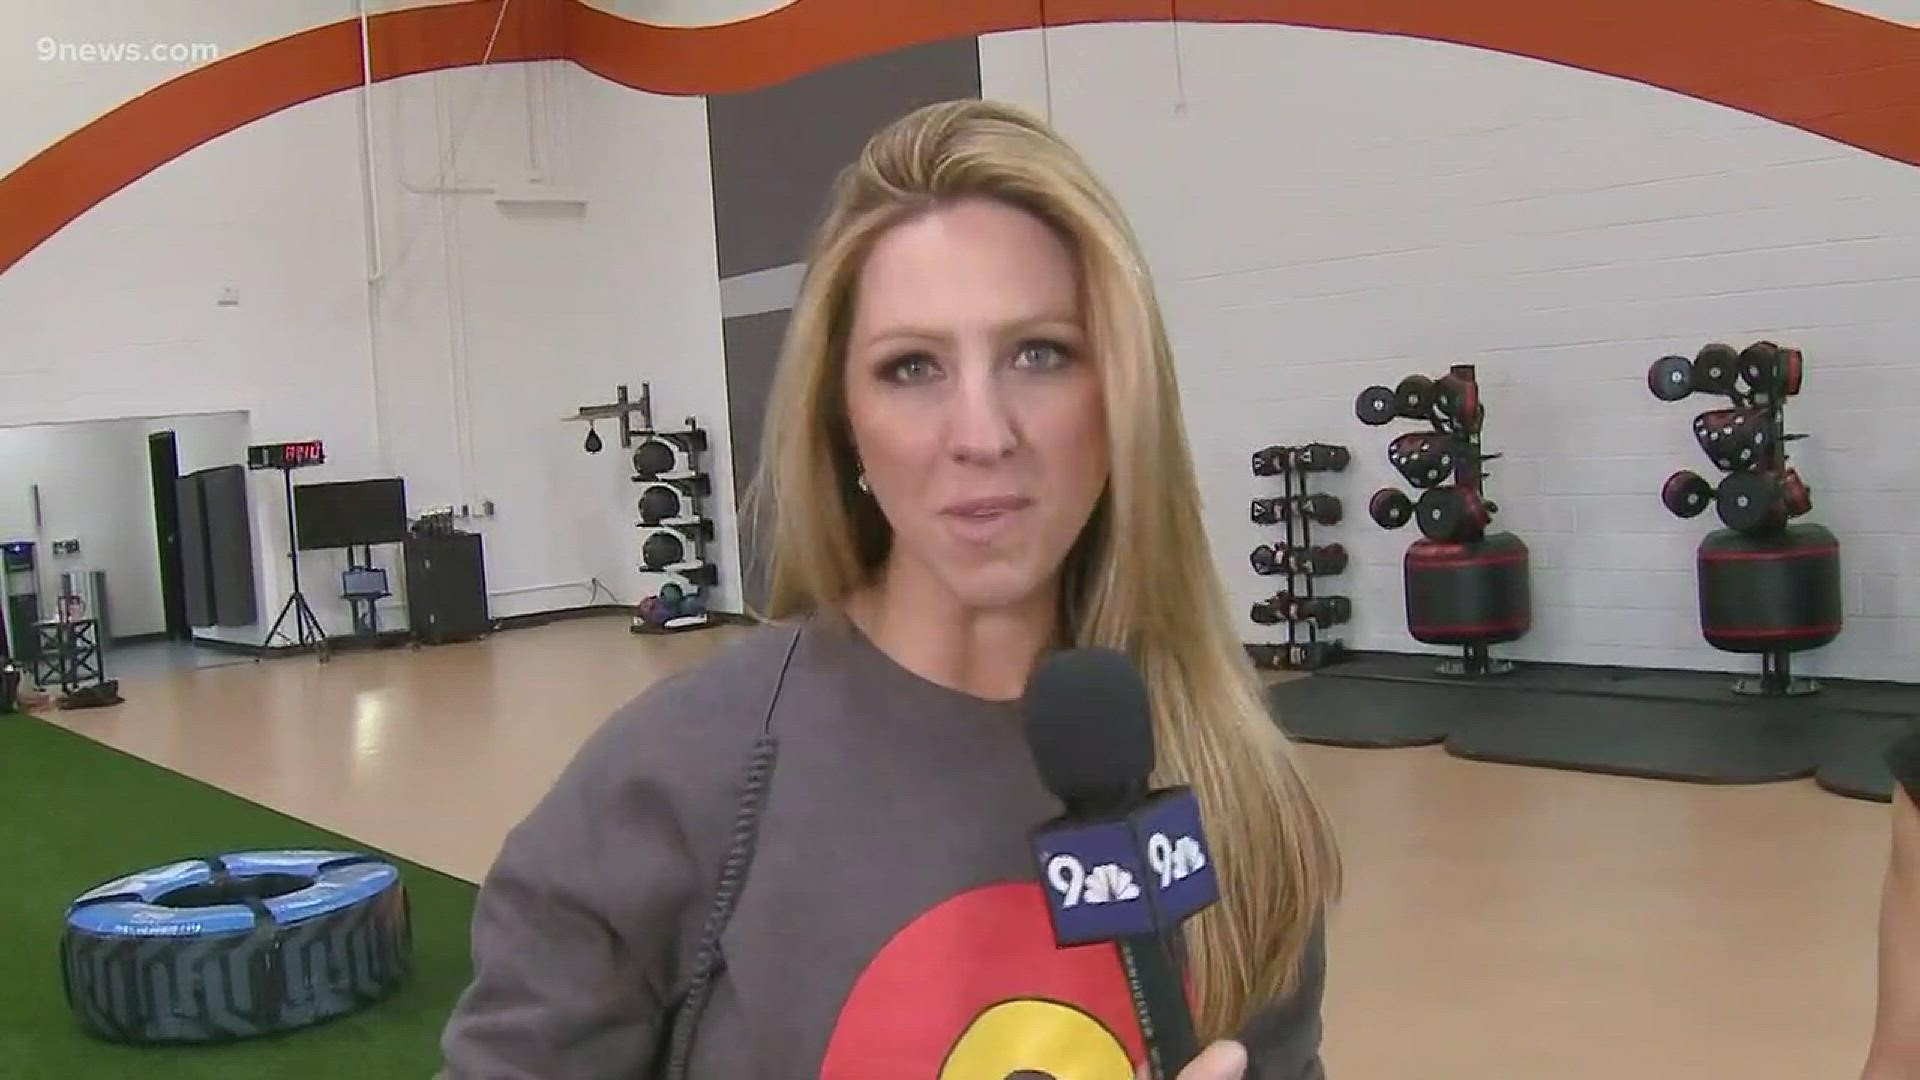 Mona Kobishop, a senior fitness specialist at Colorado Athletic Club, demonstrates exercises you can fit in at home.